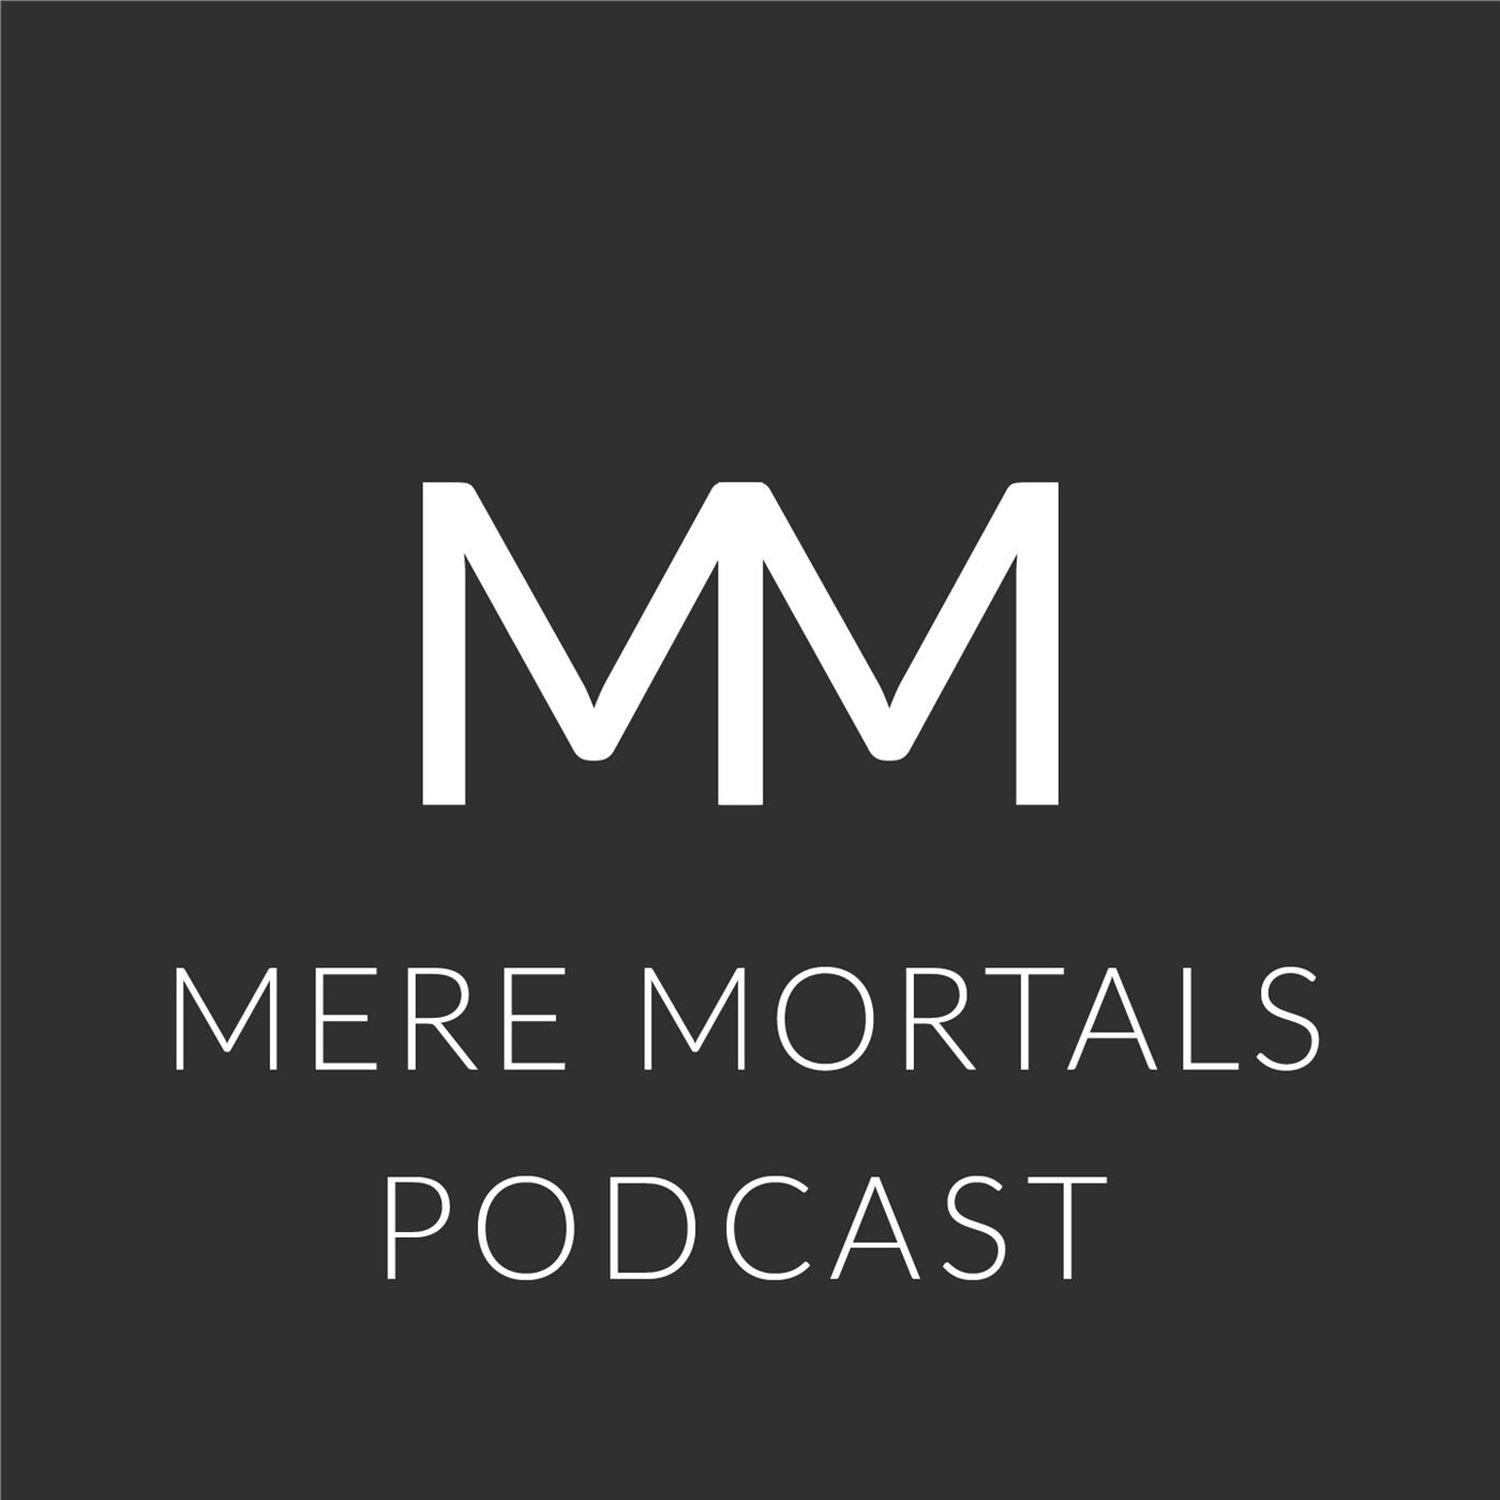 The Benefits Of Conscious Breathing (Mere Mortals Episode #80 - Breathing)